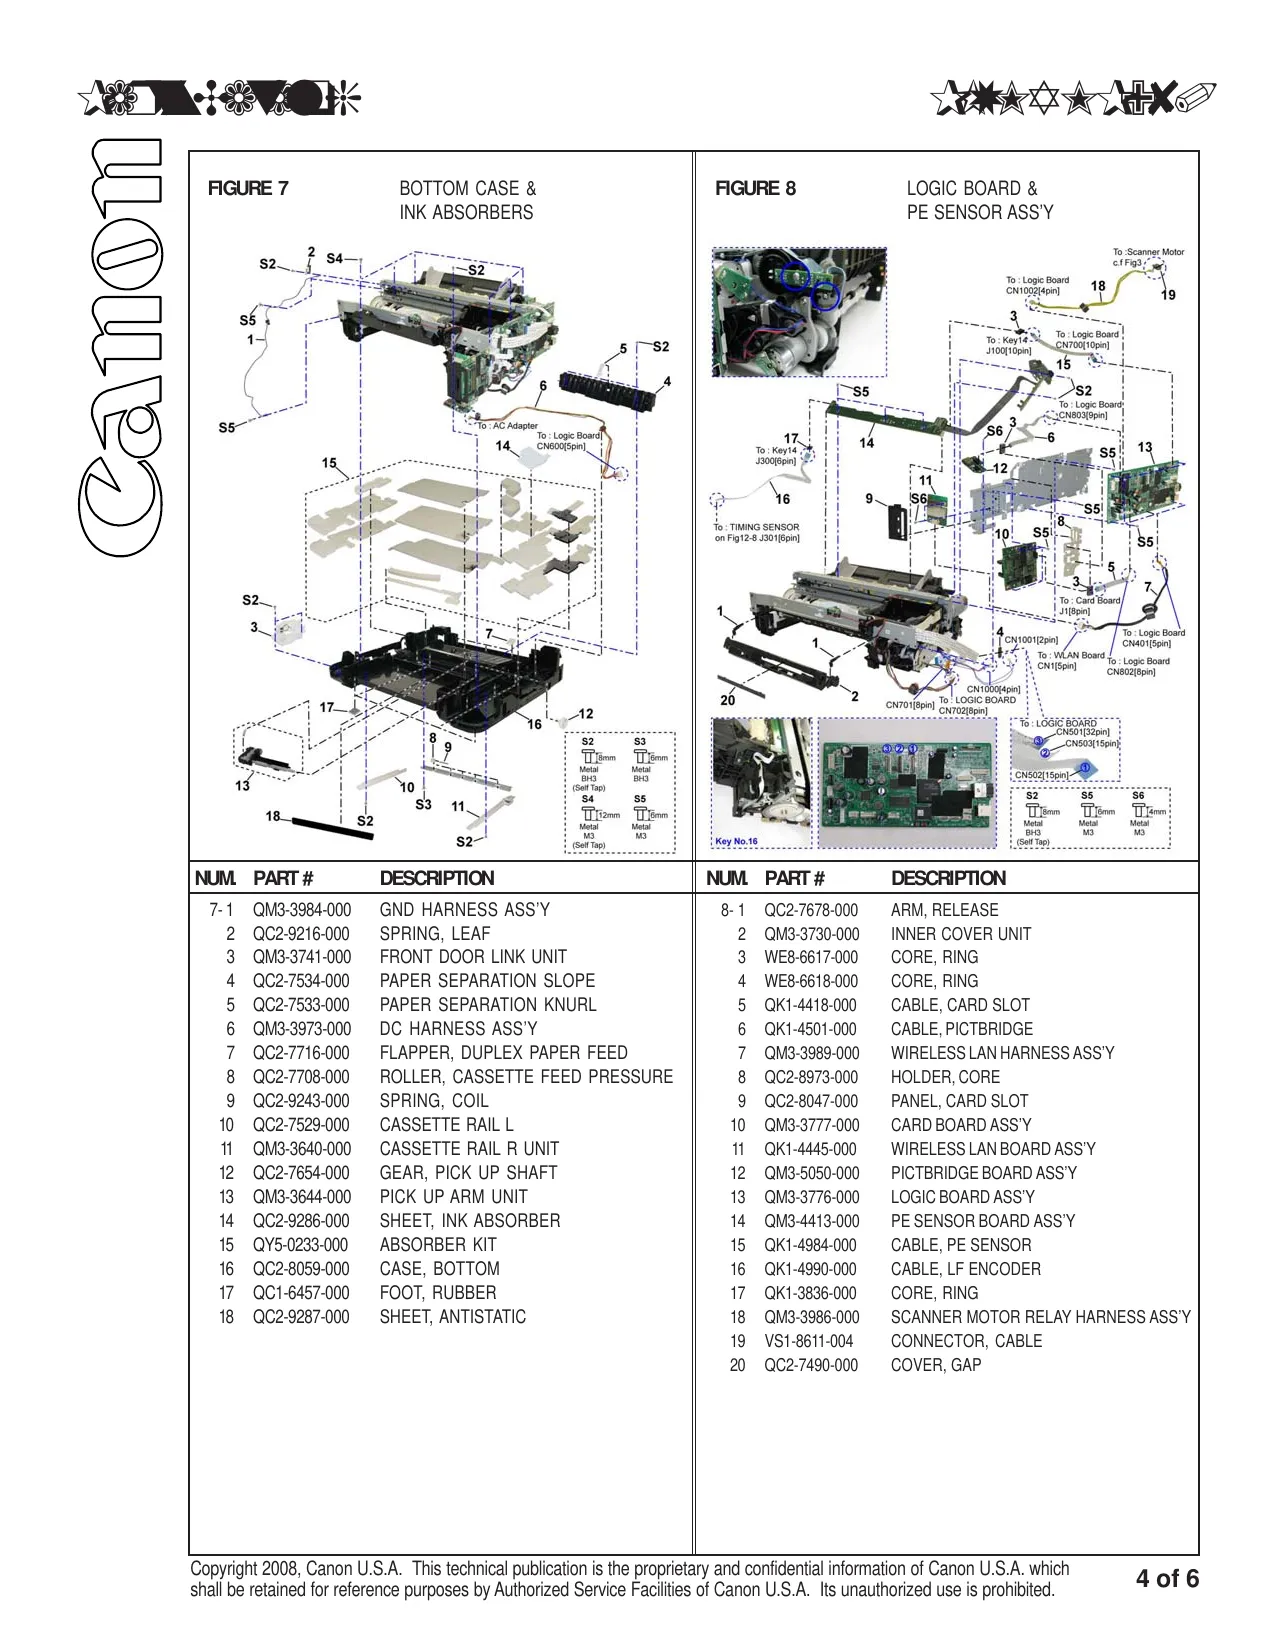 Canon Pixma MP980 multifunction inkjet printer service guide + parts catalog Preview image 5